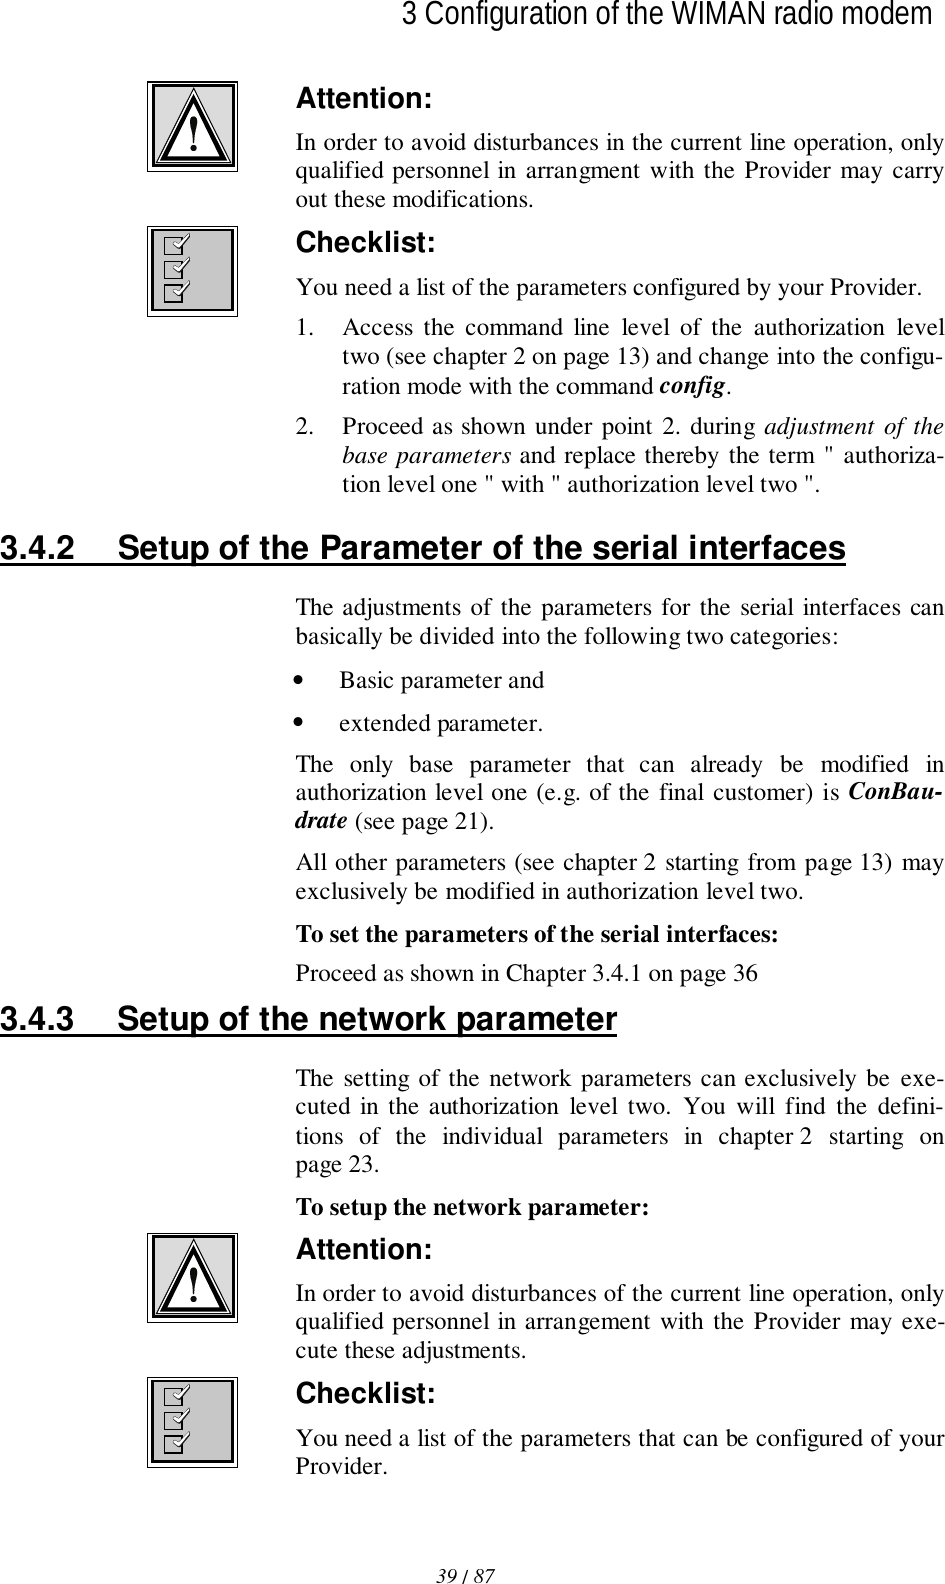 39 / 87l3 Configuration of the WIMAN radio modemAttention:In order to avoid disturbances in the current line operation, onlyqualified personnel in arrangment with the Provider may carryout these modifications.Checklist:You need a list of the parameters configured by your Provider.1. Access the command line level of the authorization leveltwo (see chapter 2 on page 13) and change into the configu-ration mode with the command config.2. Proceed as shown under point 2. during adjustment of thebase parameters and replace thereby the term &quot; authoriza-tion level one &quot; with &quot; authorization level two &quot;.3.4.2  Setup of the Parameter of the serial interfacesThe adjustments of the parameters for the serial interfaces canbasically be divided into the following two categories:• Basic parameter and• extended parameter.The only base parameter that can already be modified inauthorization level one (e.g. of the final customer) is ConBau-drate (see page 21).All other parameters (see chapter 2 starting from page 13) mayexclusively be modified in authorization level two.To set the parameters of the serial interfaces:Proceed as shown in Chapter 3.4.1 on page 363.4.3  Setup of the network parameterThe setting of the network parameters can exclusively be exe-cuted in the authorization level two. You will find the defini-tions of the individual parameters in chapter 2 starting onpage 23.To setup the network parameter:Attention:In order to avoid disturbances of the current line operation, onlyqualified personnel in arrangement with the Provider may exe-cute these adjustments.Checklist:You need a list of the parameters that can be configured of yourProvider.